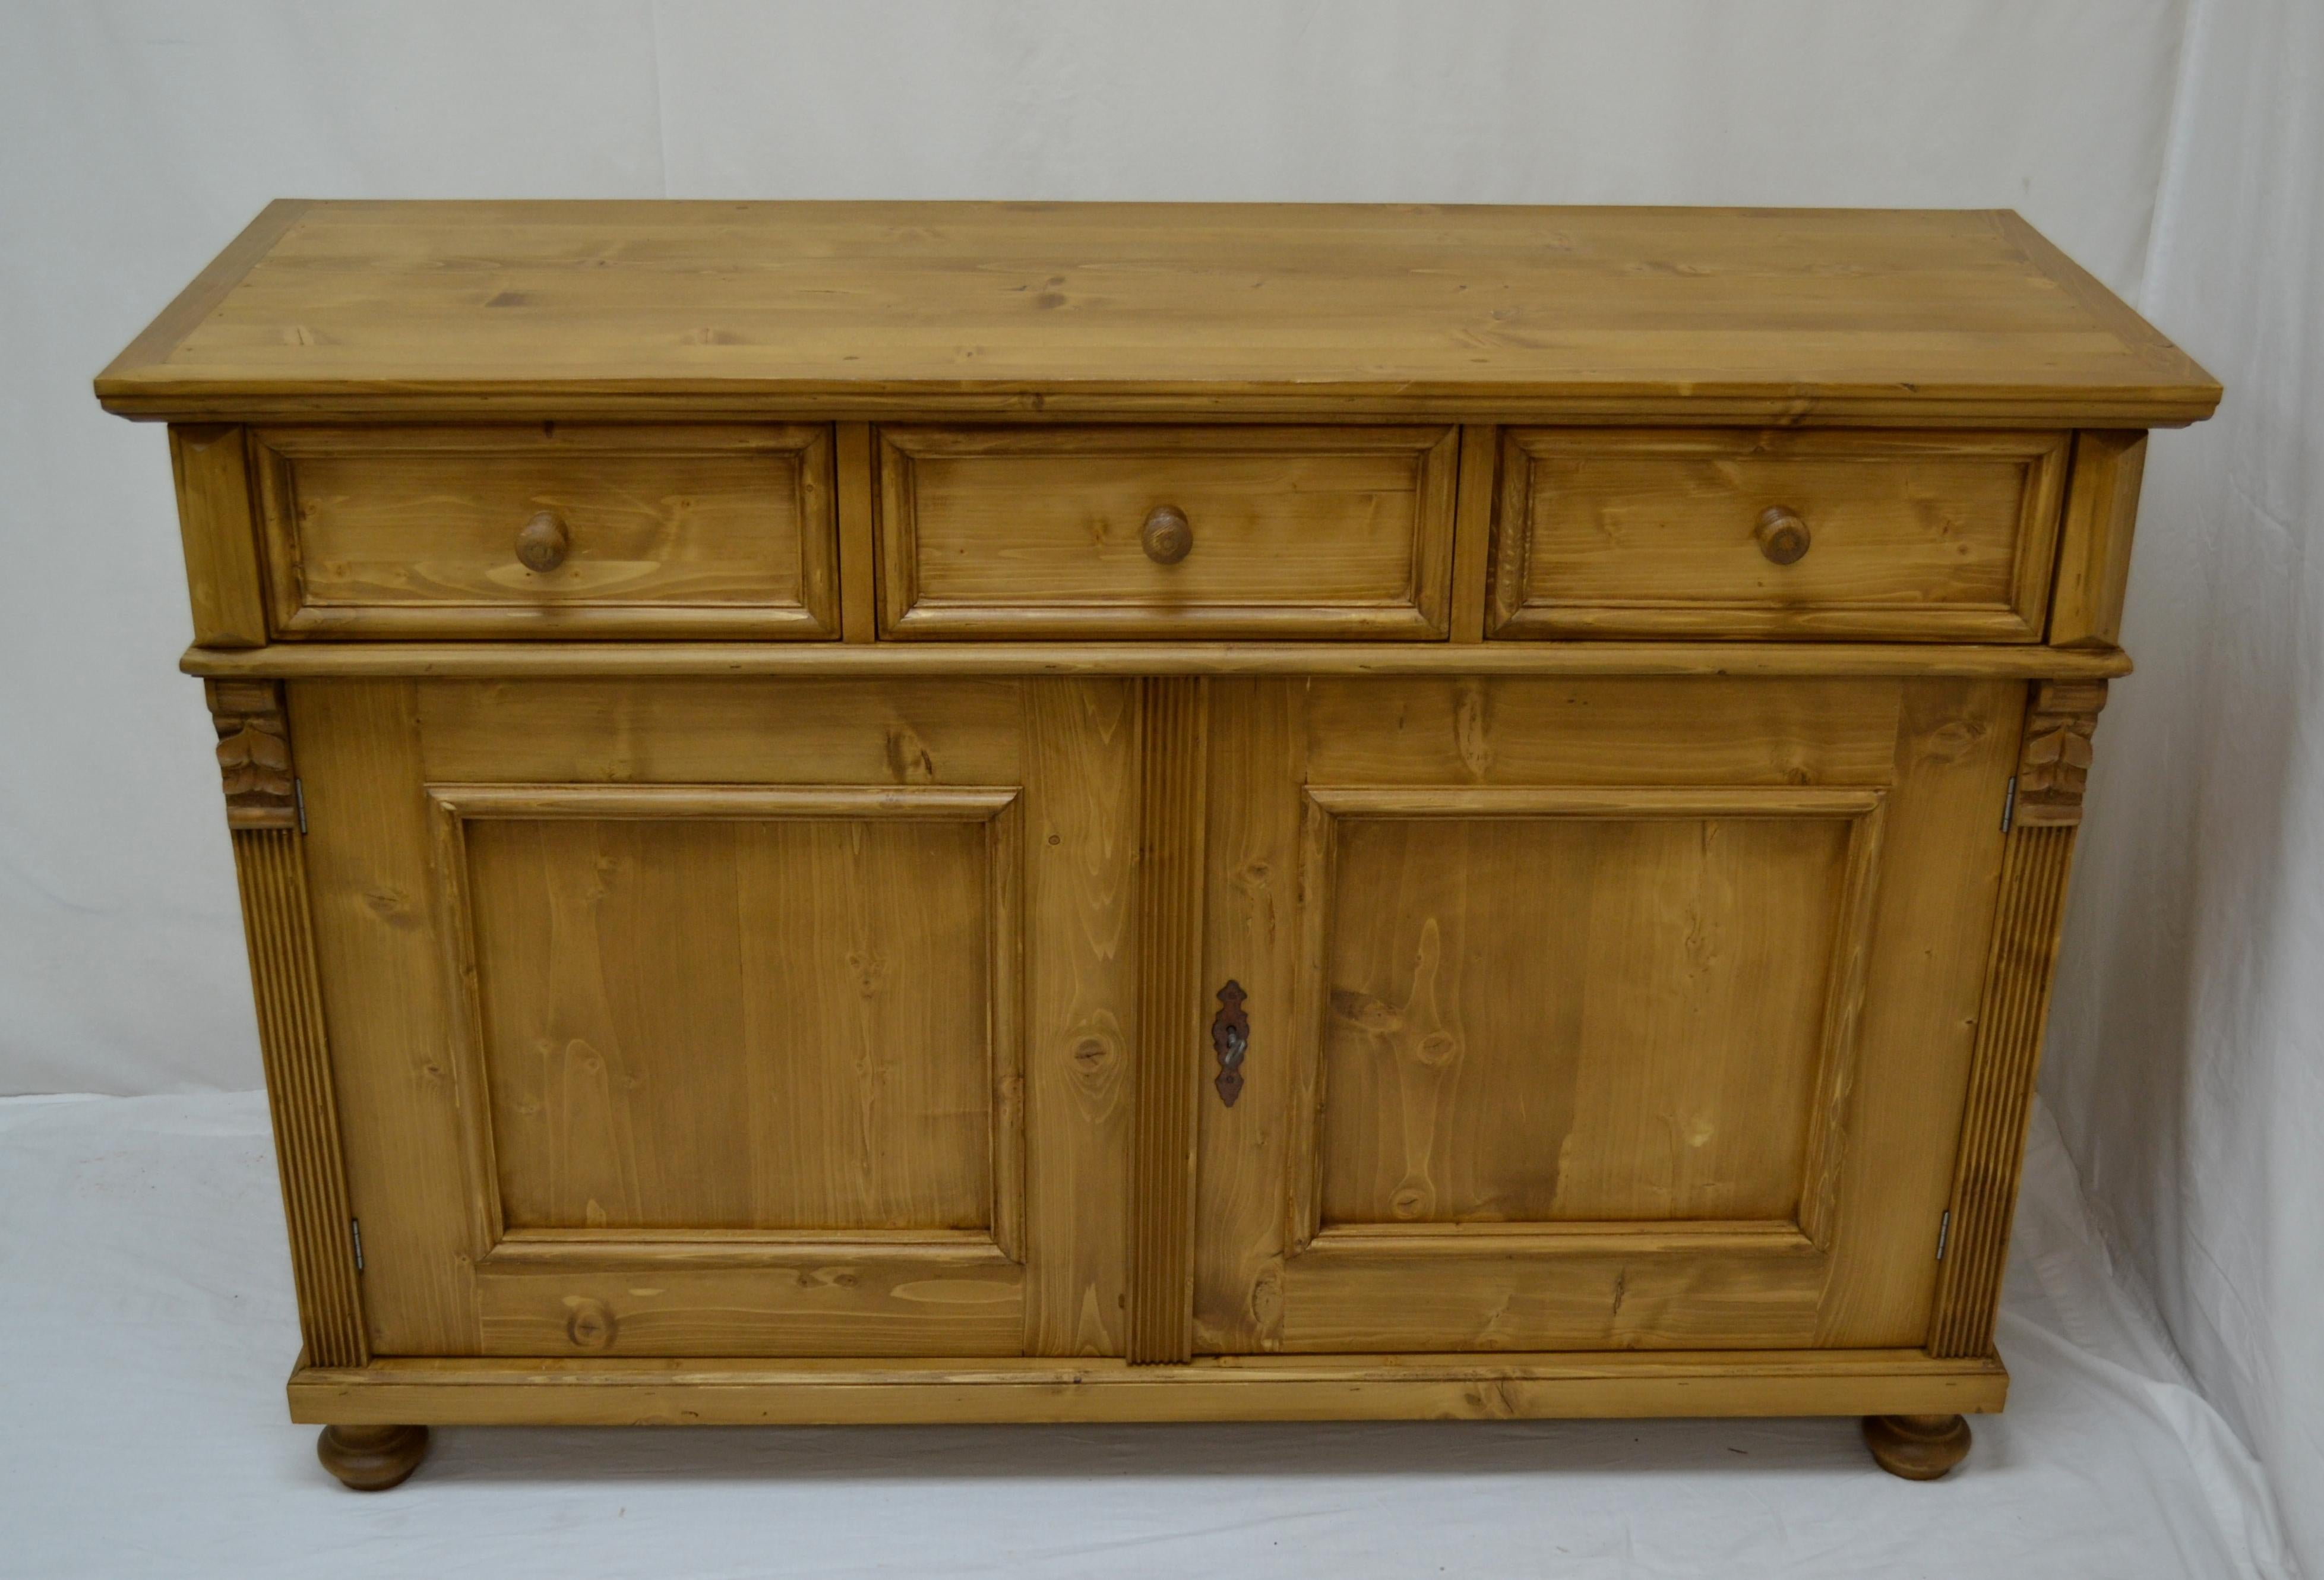 This is a shorter version of a popular pine mine sideboard design, this one with two doors and three drawers. Built in central Europe from reclaimed pine, this most versatile piece works well as a single or double vanity in the bathroom, as a base